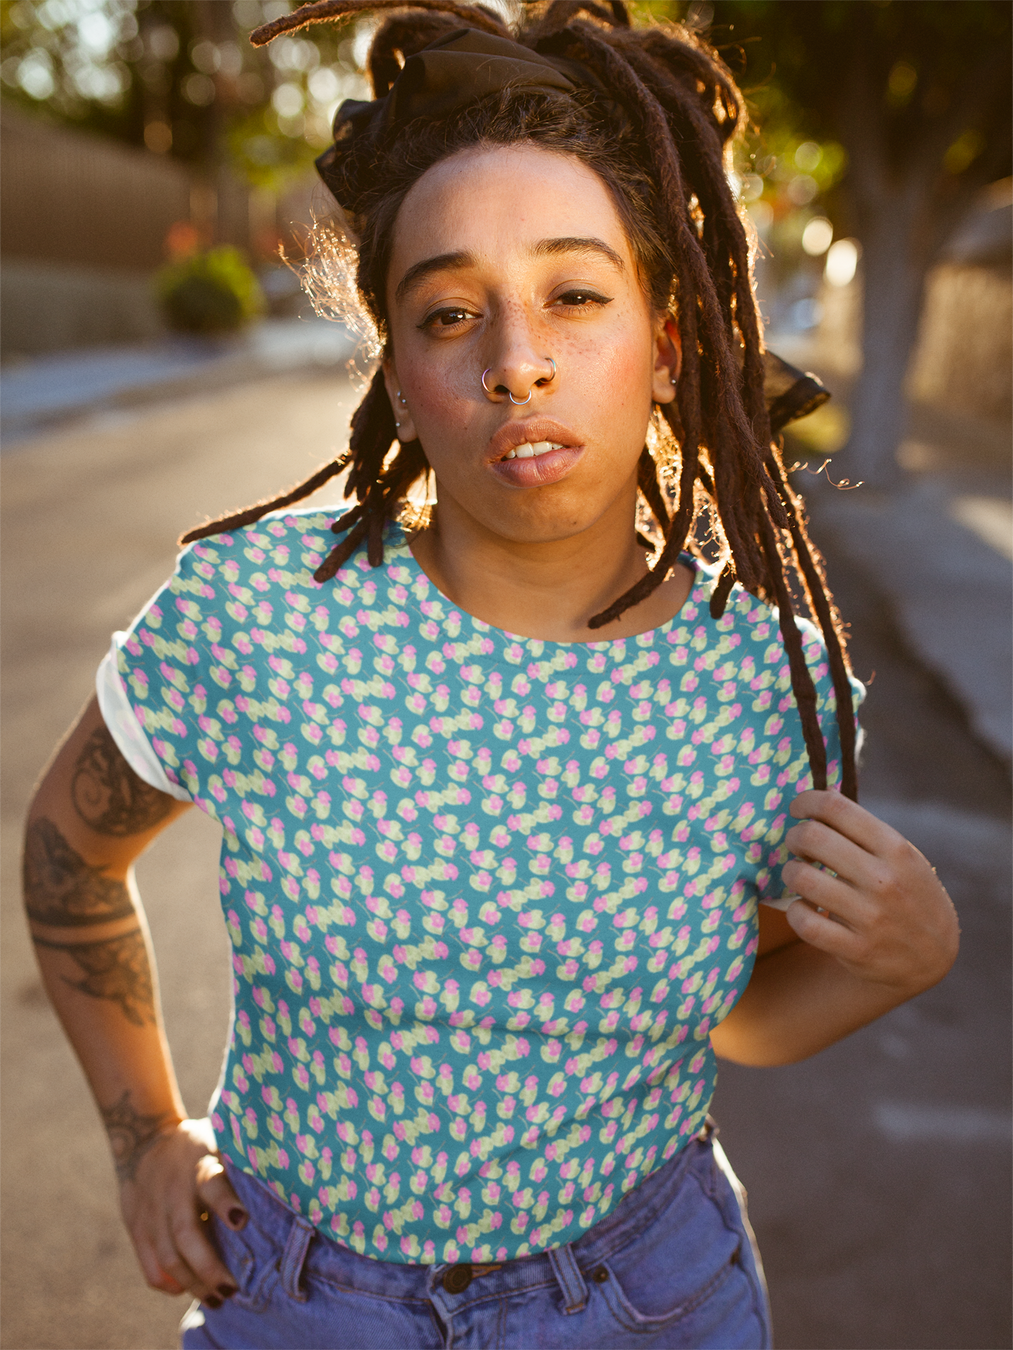 Sun kissed dreadlock sister wearing a blue shirt with pink flowers